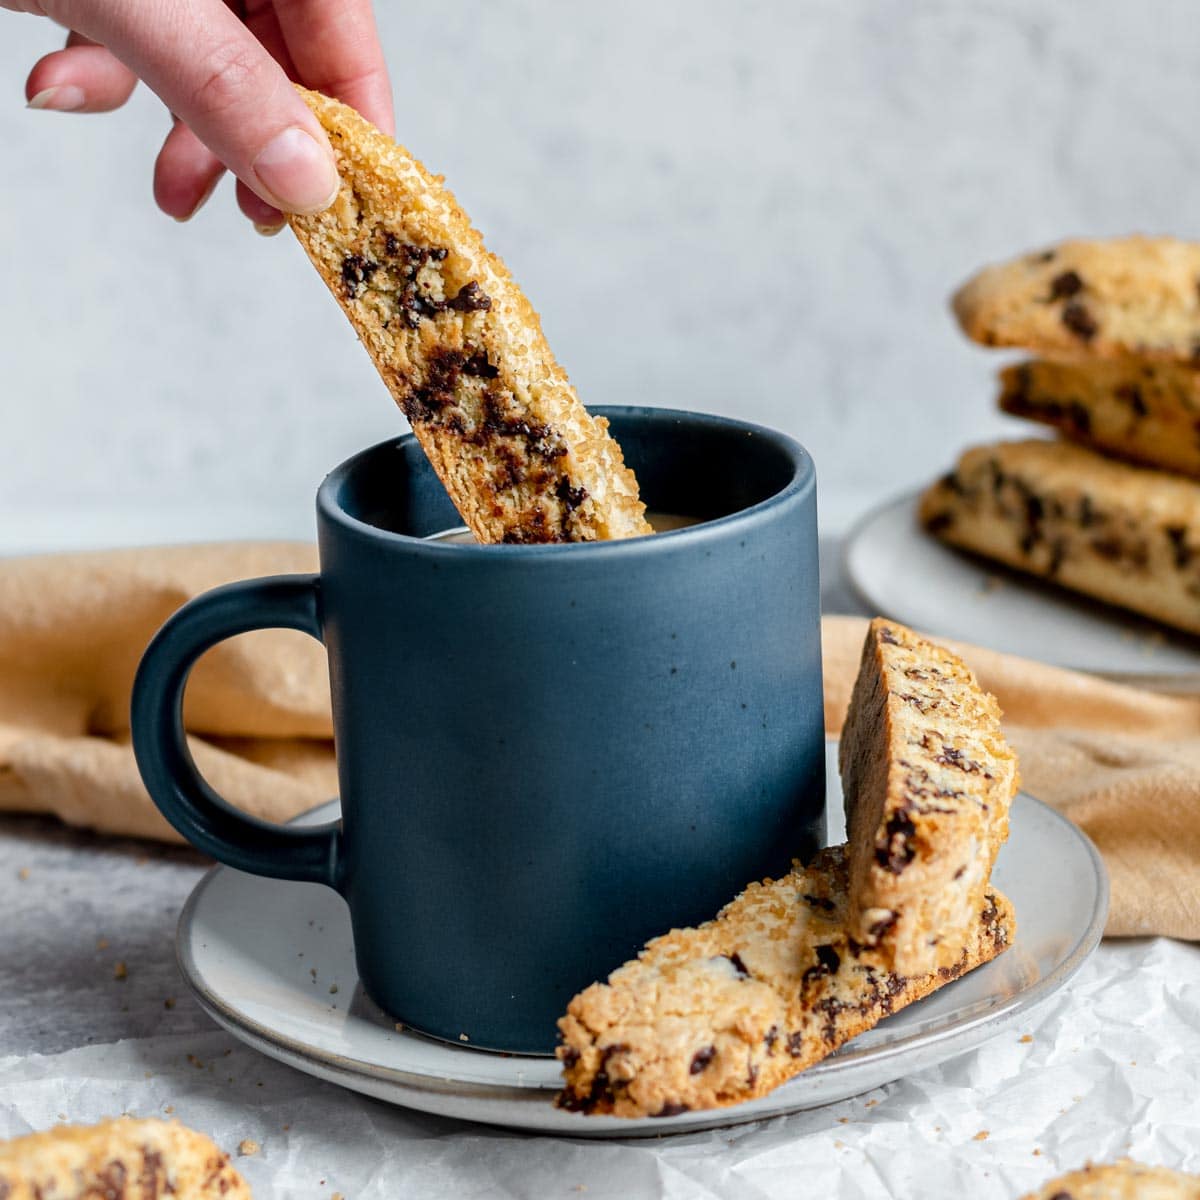 Chocolate Chip Biscotti baked cookie being dunked into cup of coffee with other cookies on plate